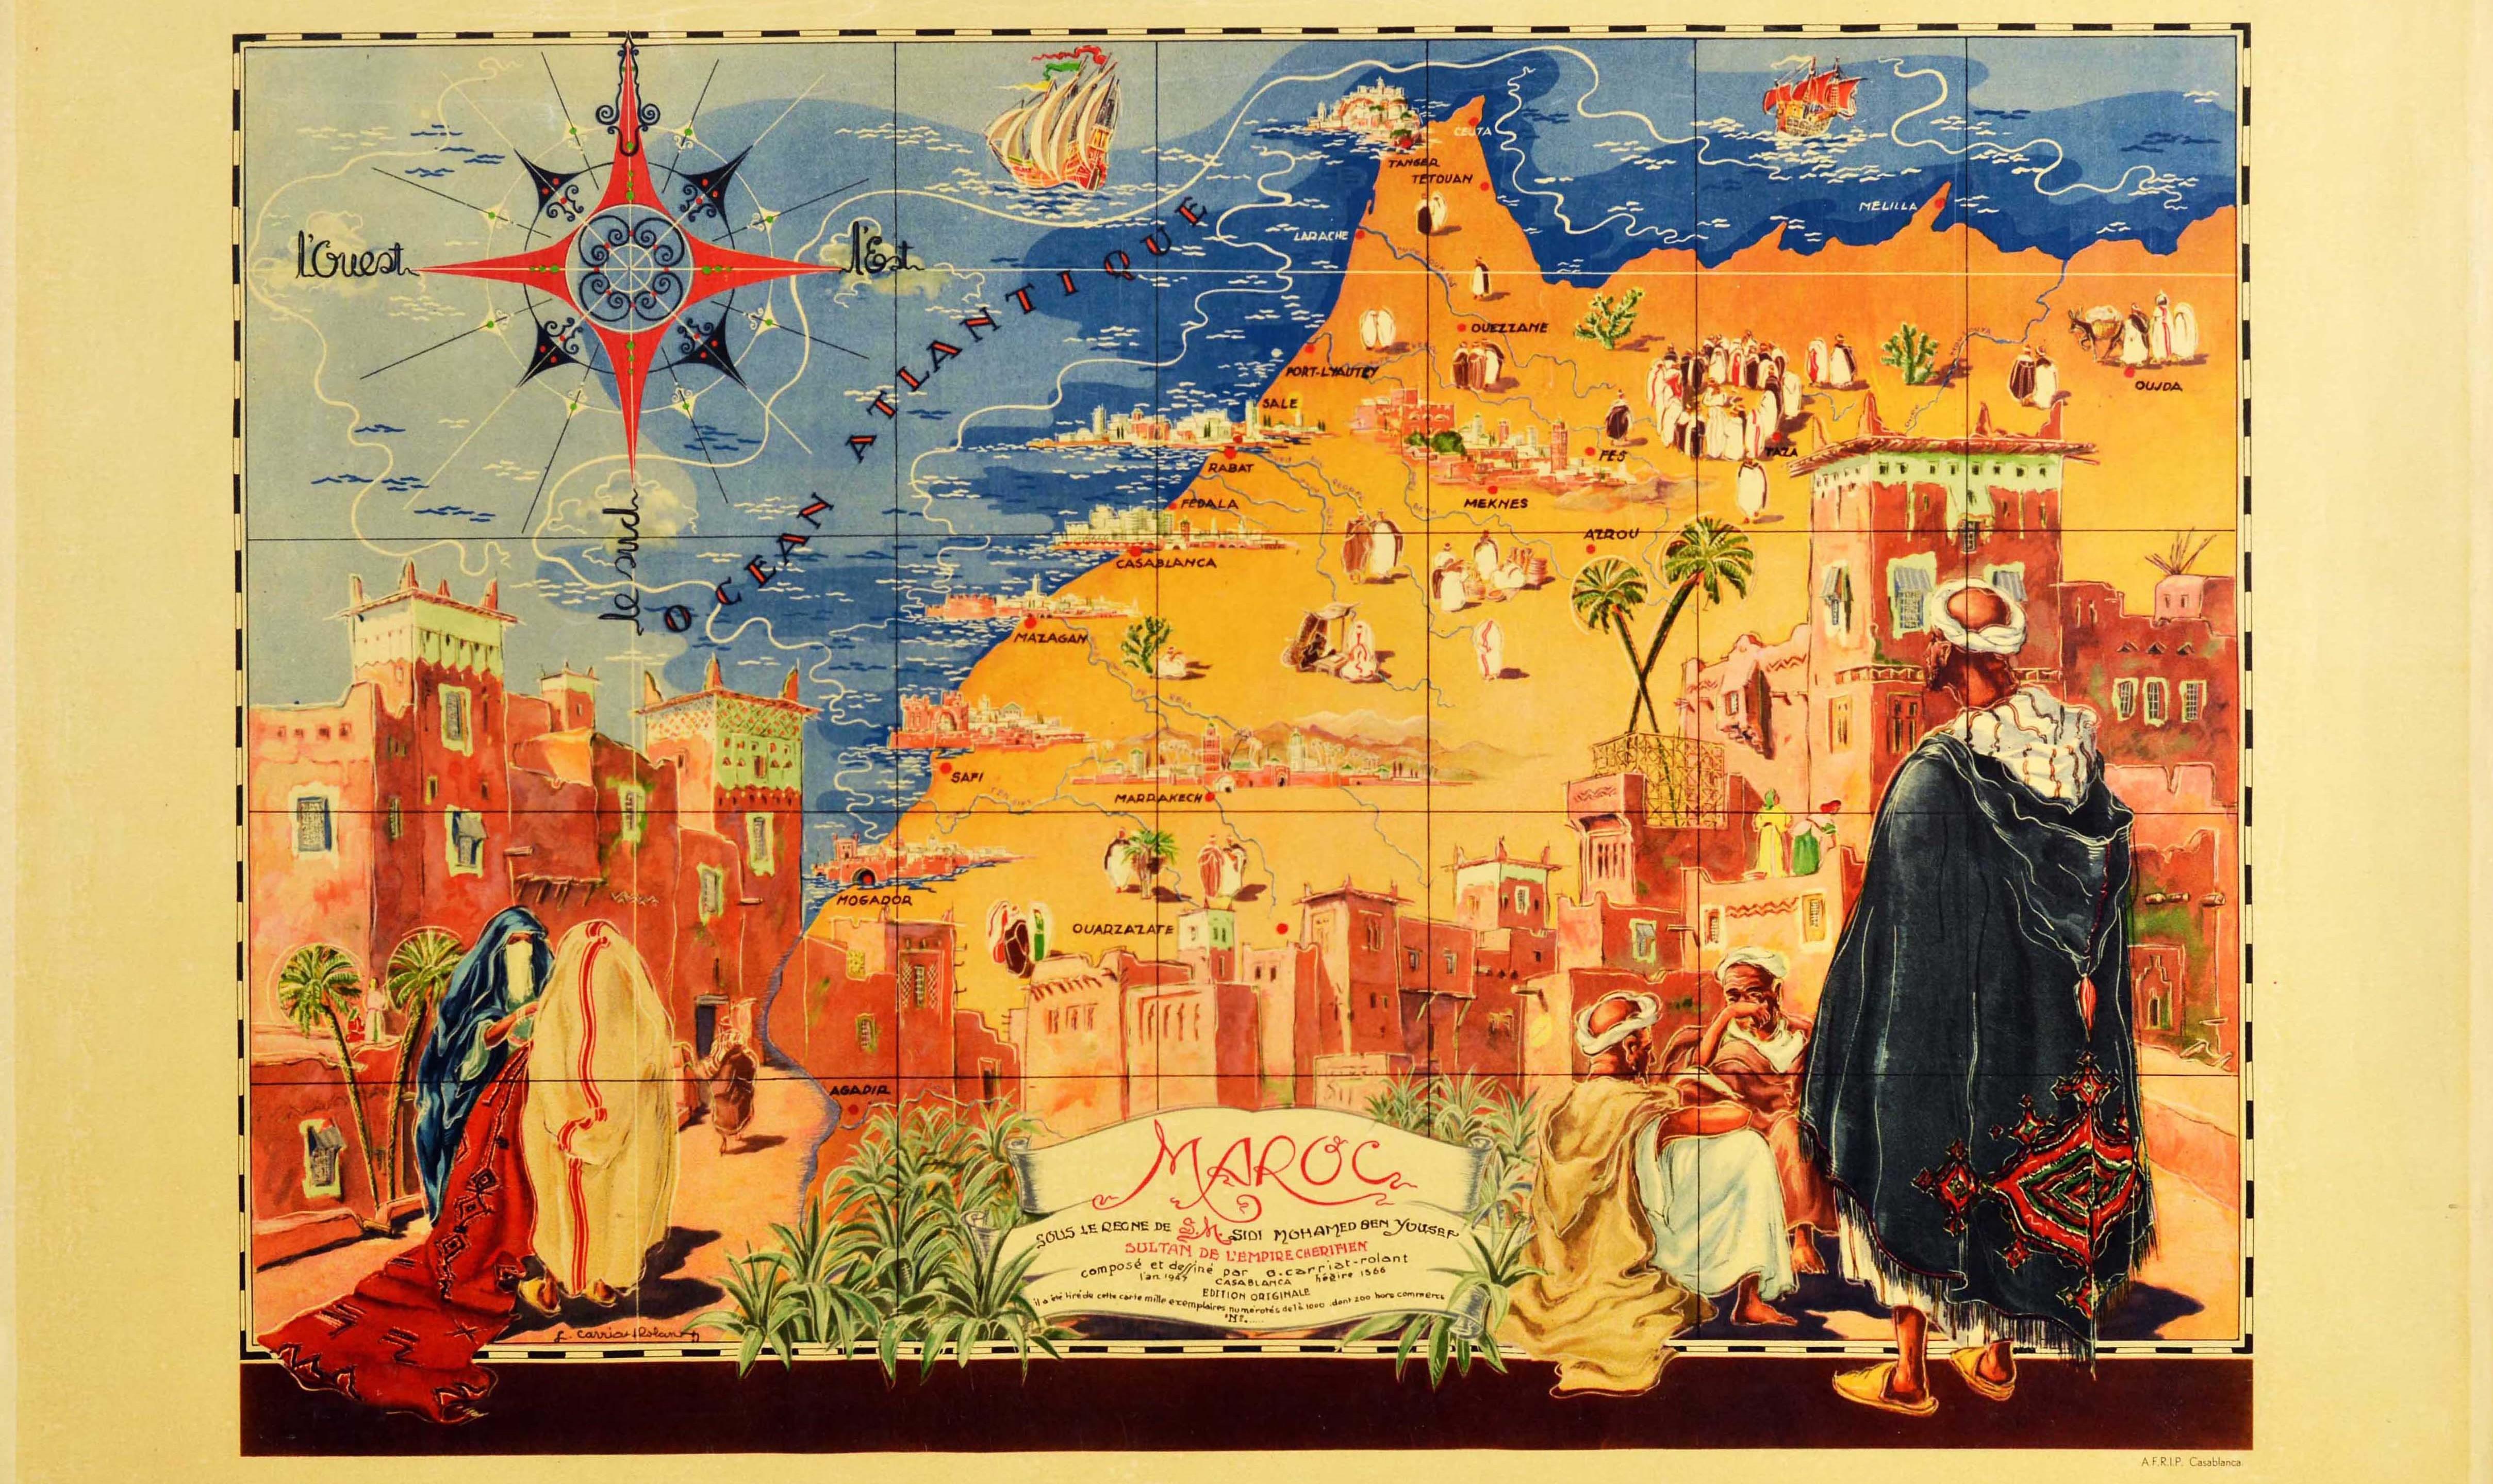 Original vintage travel poster - Maroc sous la Regne de S.M. Sidi Mohamed Ben Yousef Sultan de l'Empire Cherifien hegira 1566 - featuring an illustrated map design of the ancient north Africa country of Morocco marking the towns and cities including